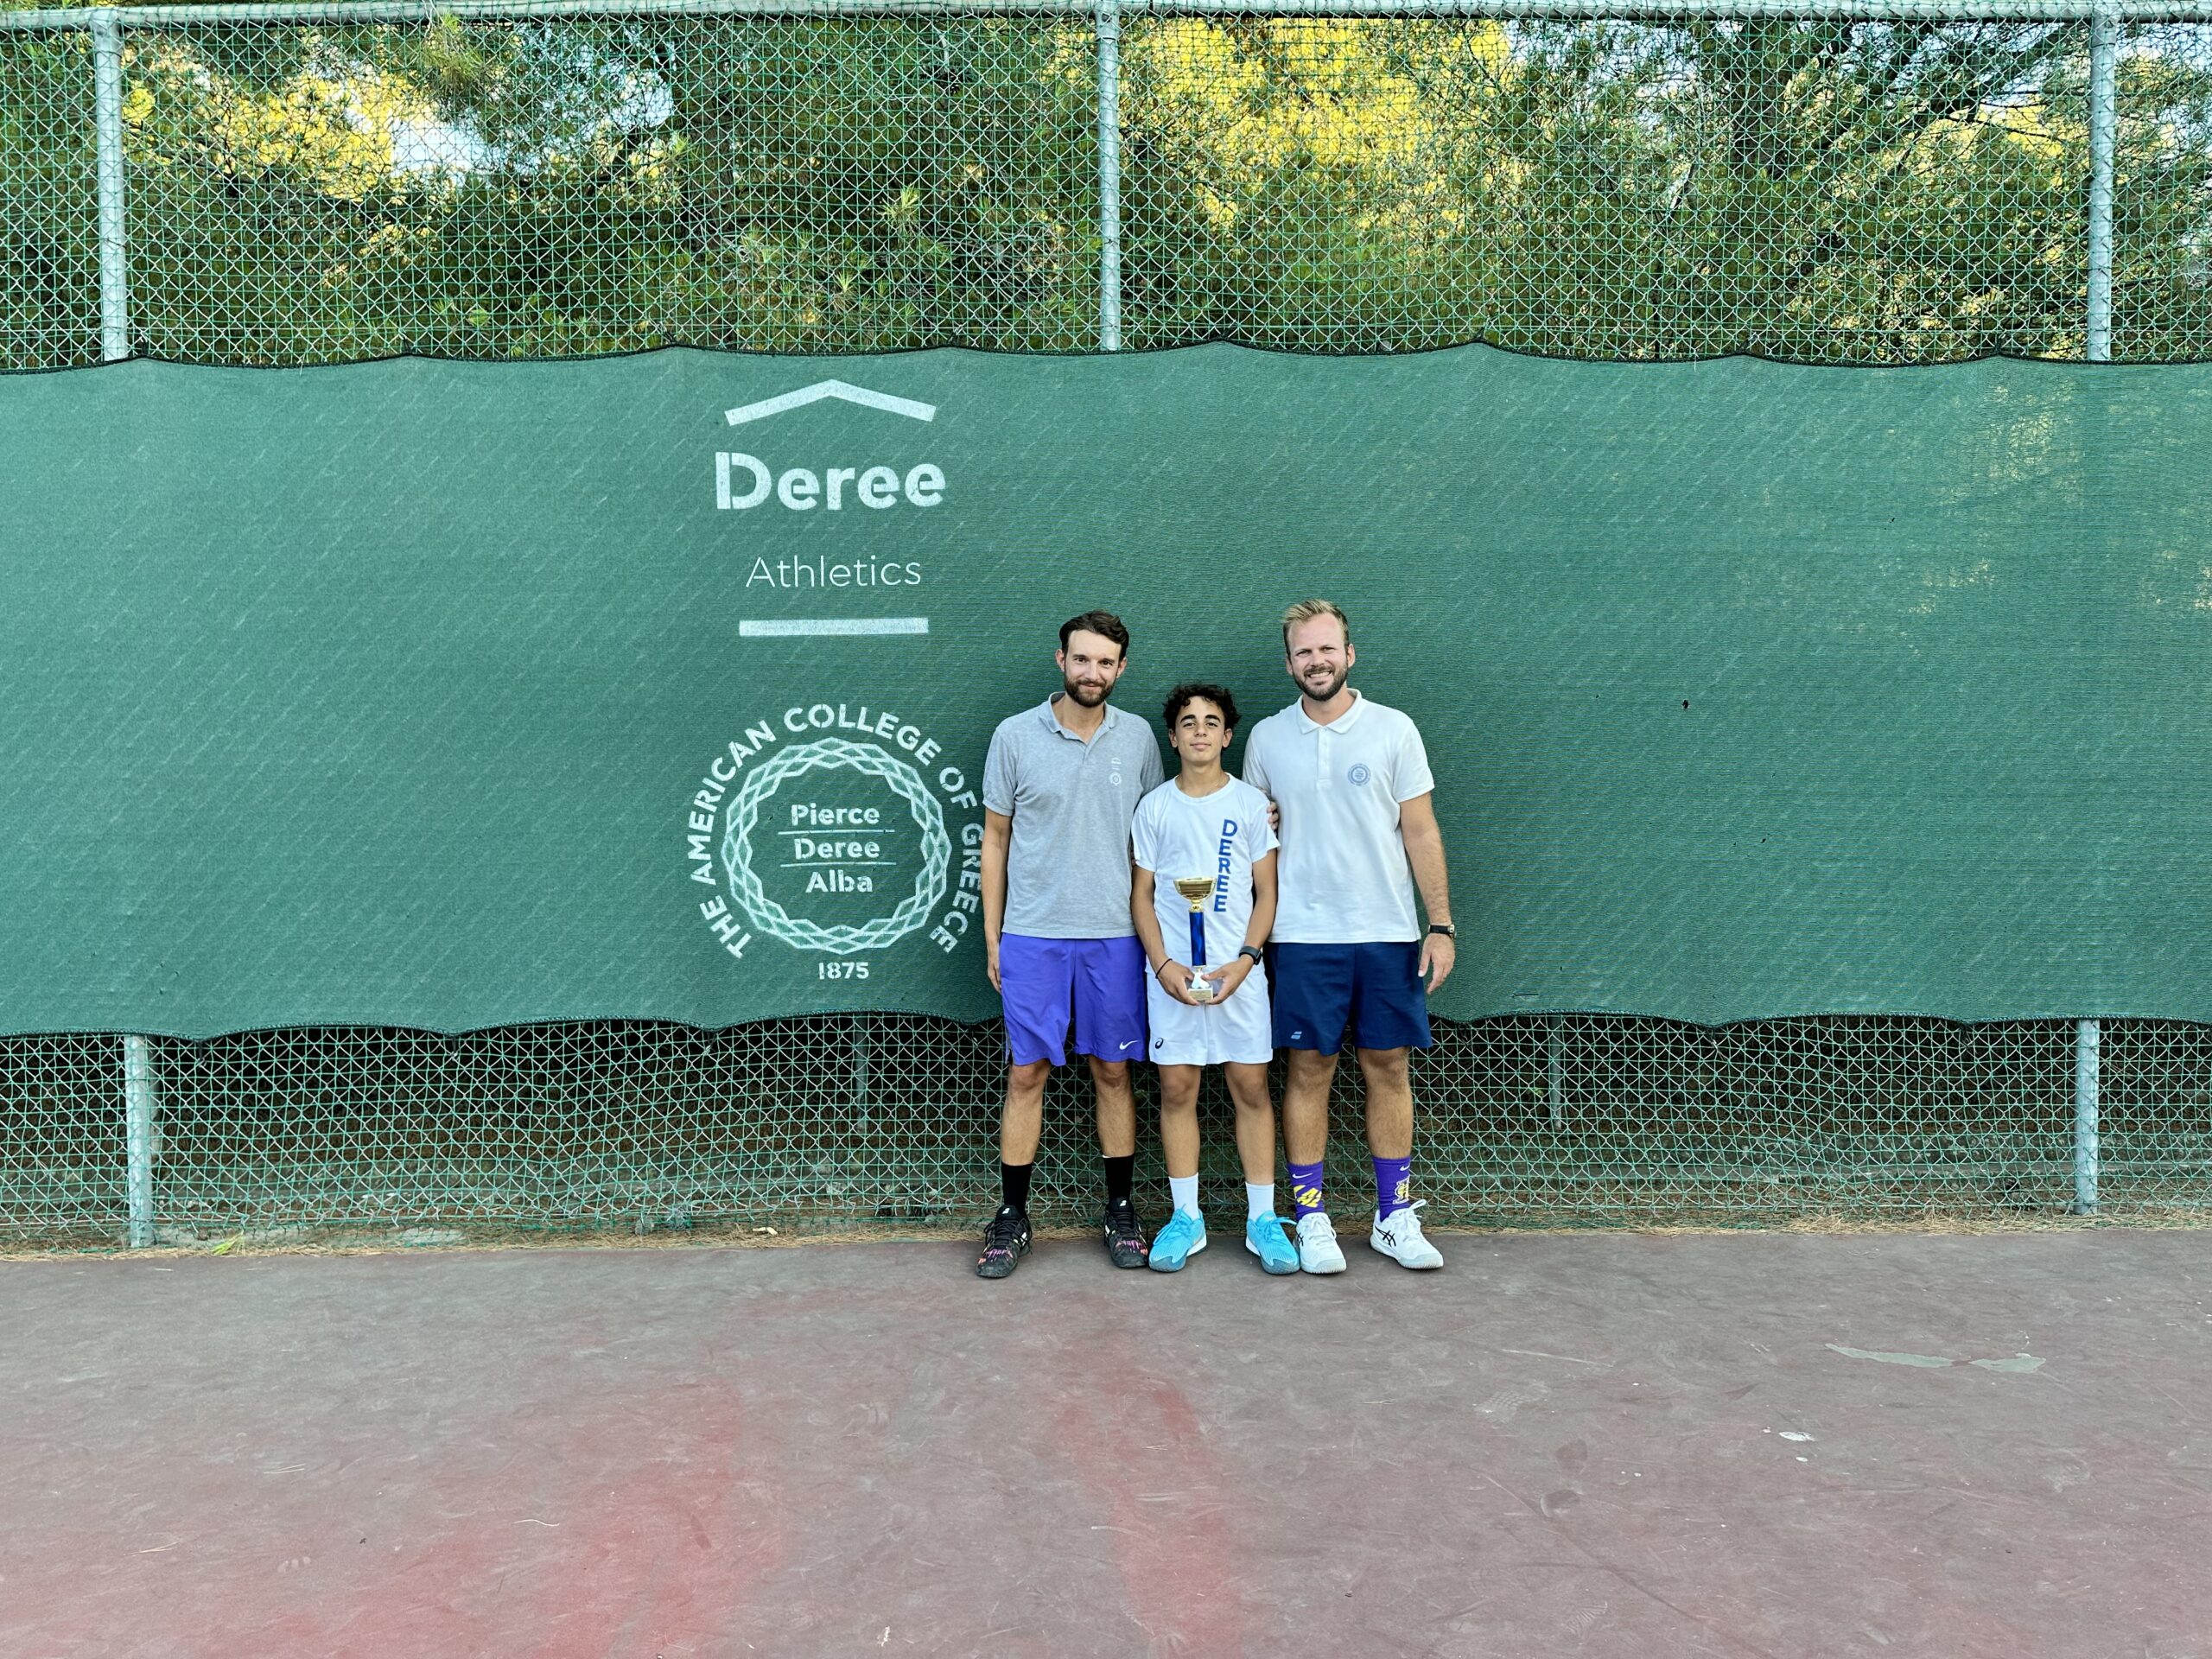 Success for the Deree Tennis Academy at the U16 E3 tennis tournament in Vari.